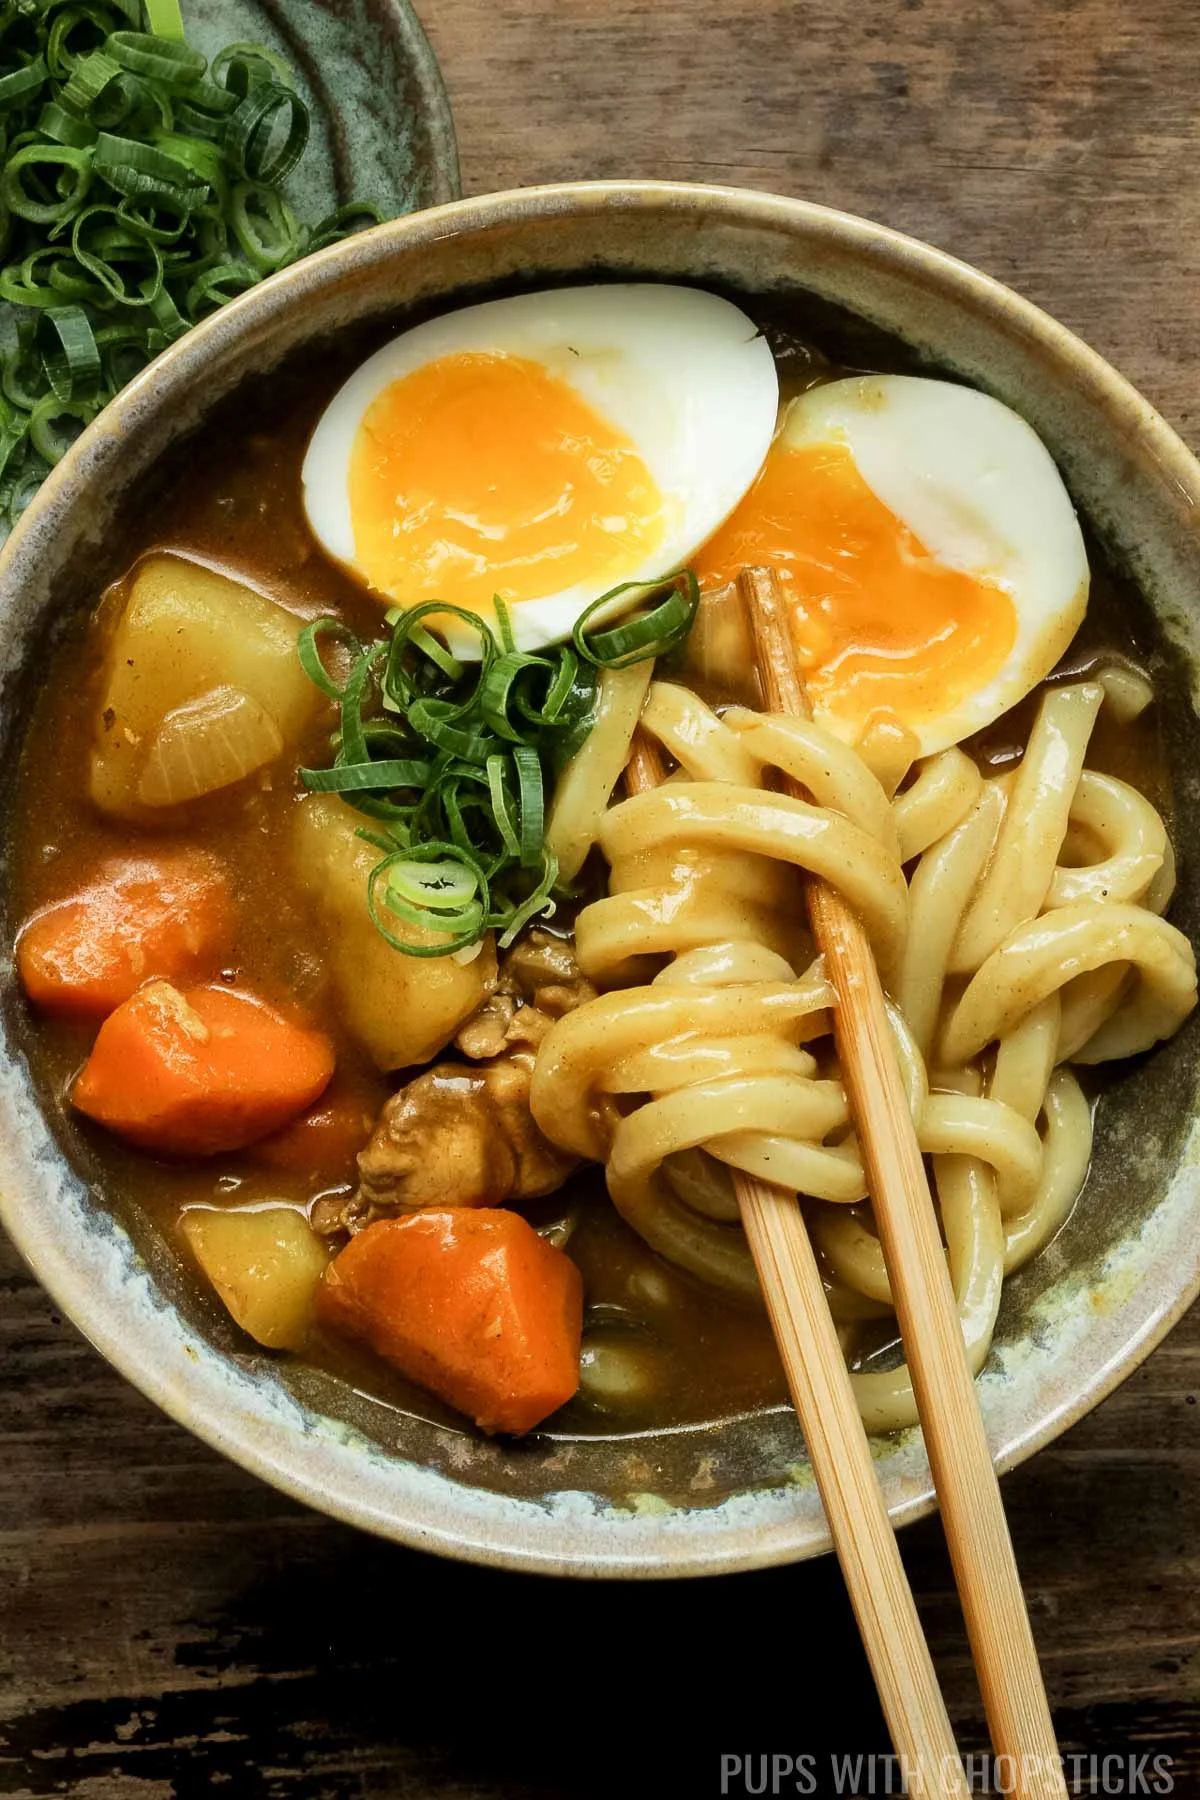 Japanese curry udon noodles being eaten with wooden chopsticks